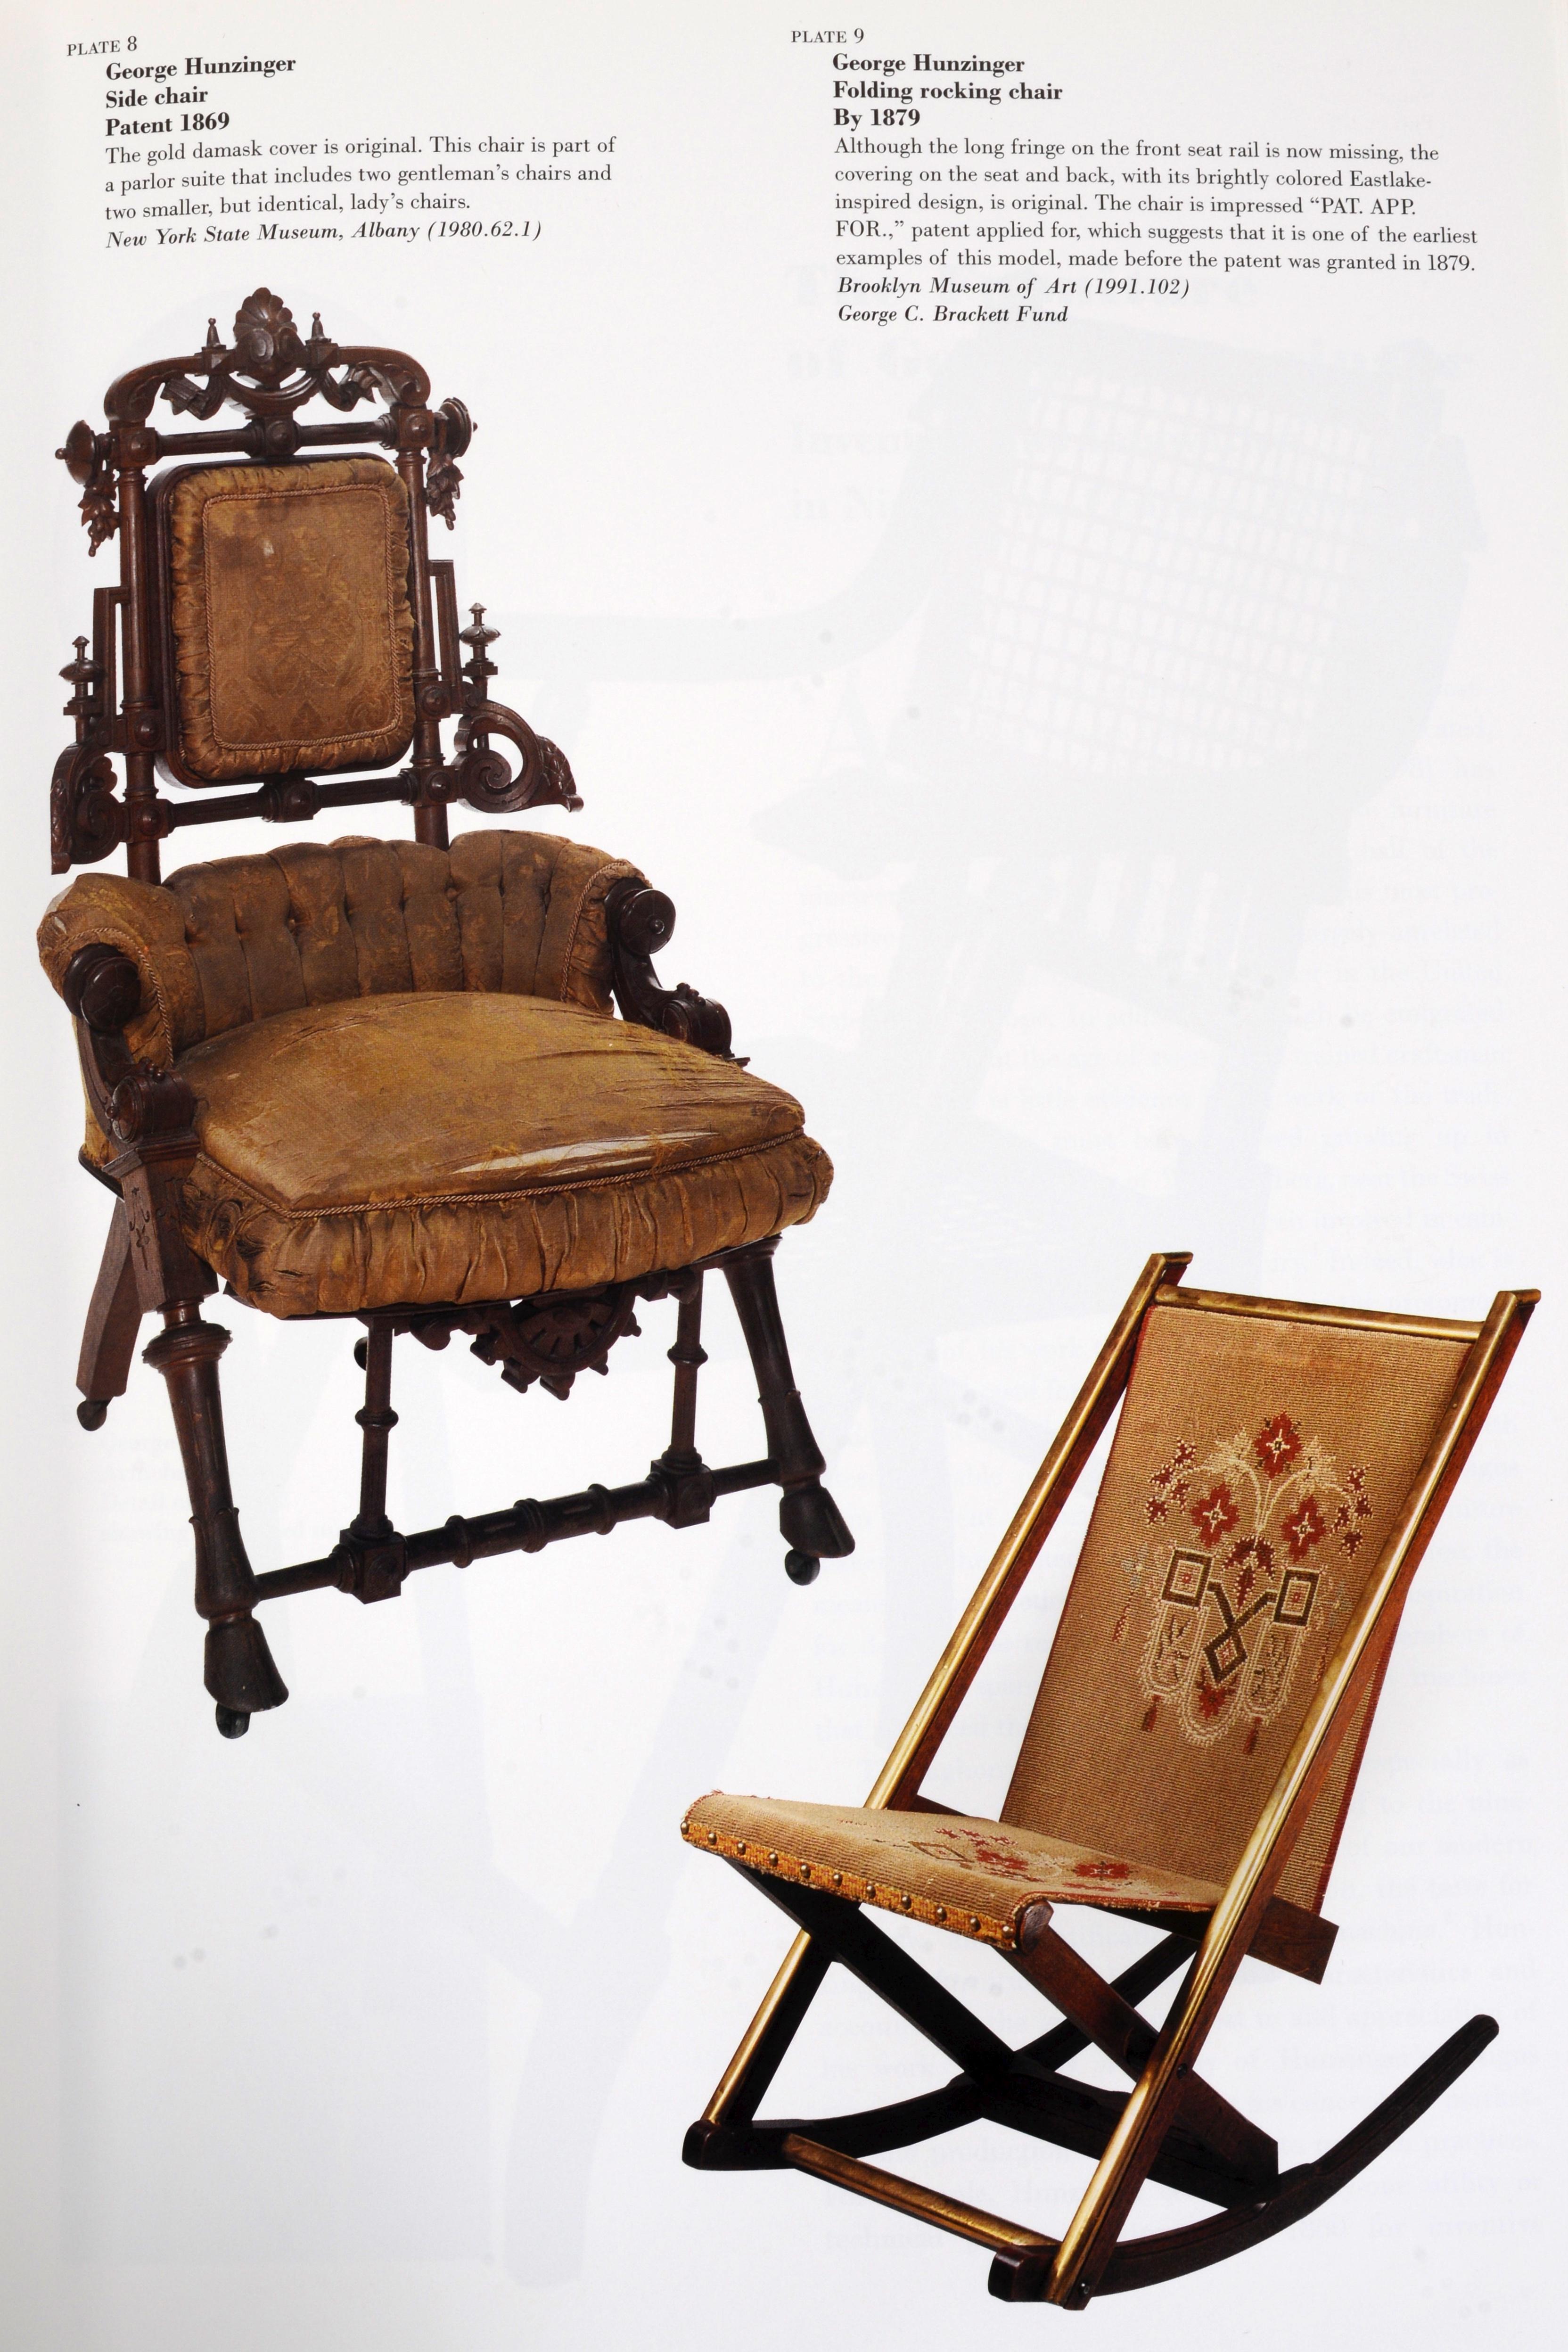 Paper Furniture of George Hunzinger: Invention & Innovation in 19th-Century America For Sale